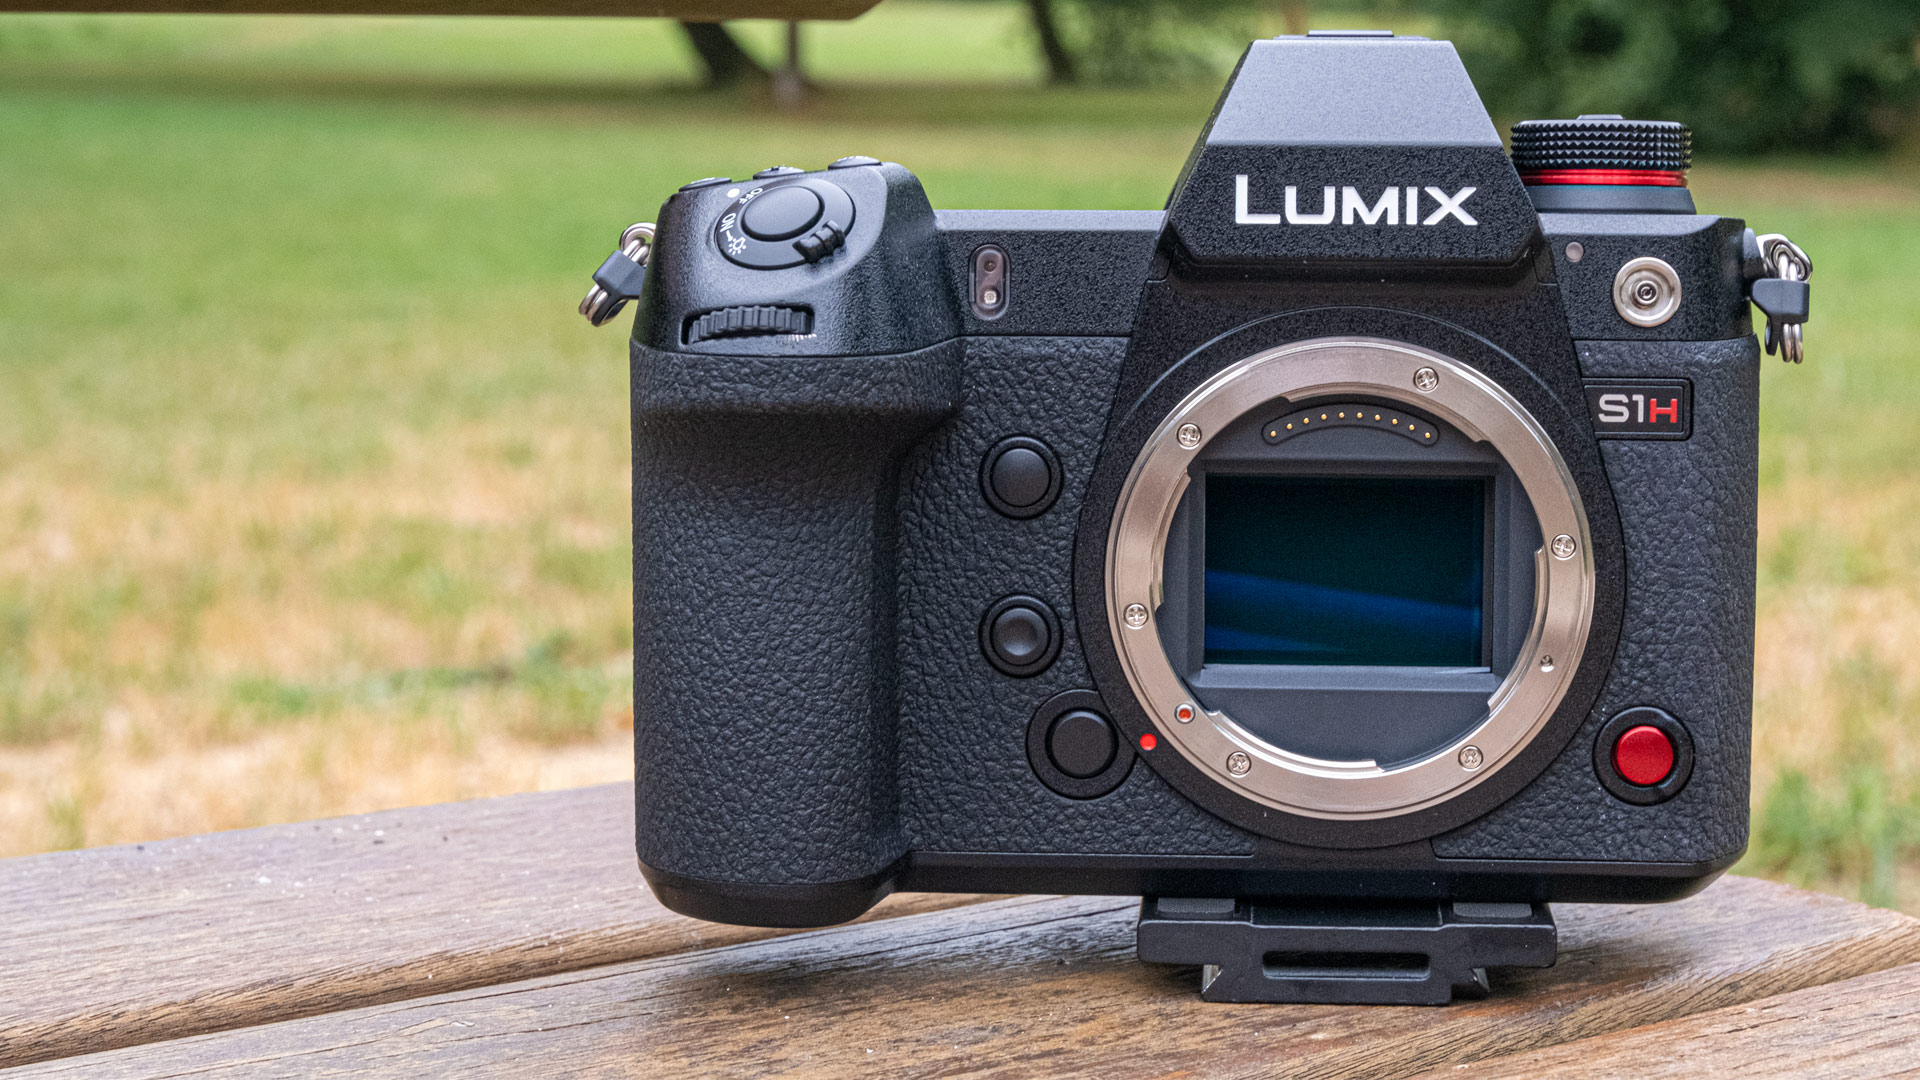 Panasonic LUMIX S1H - Specs Details, First Look at the 6K Full-Frame Mirrorless | CineD